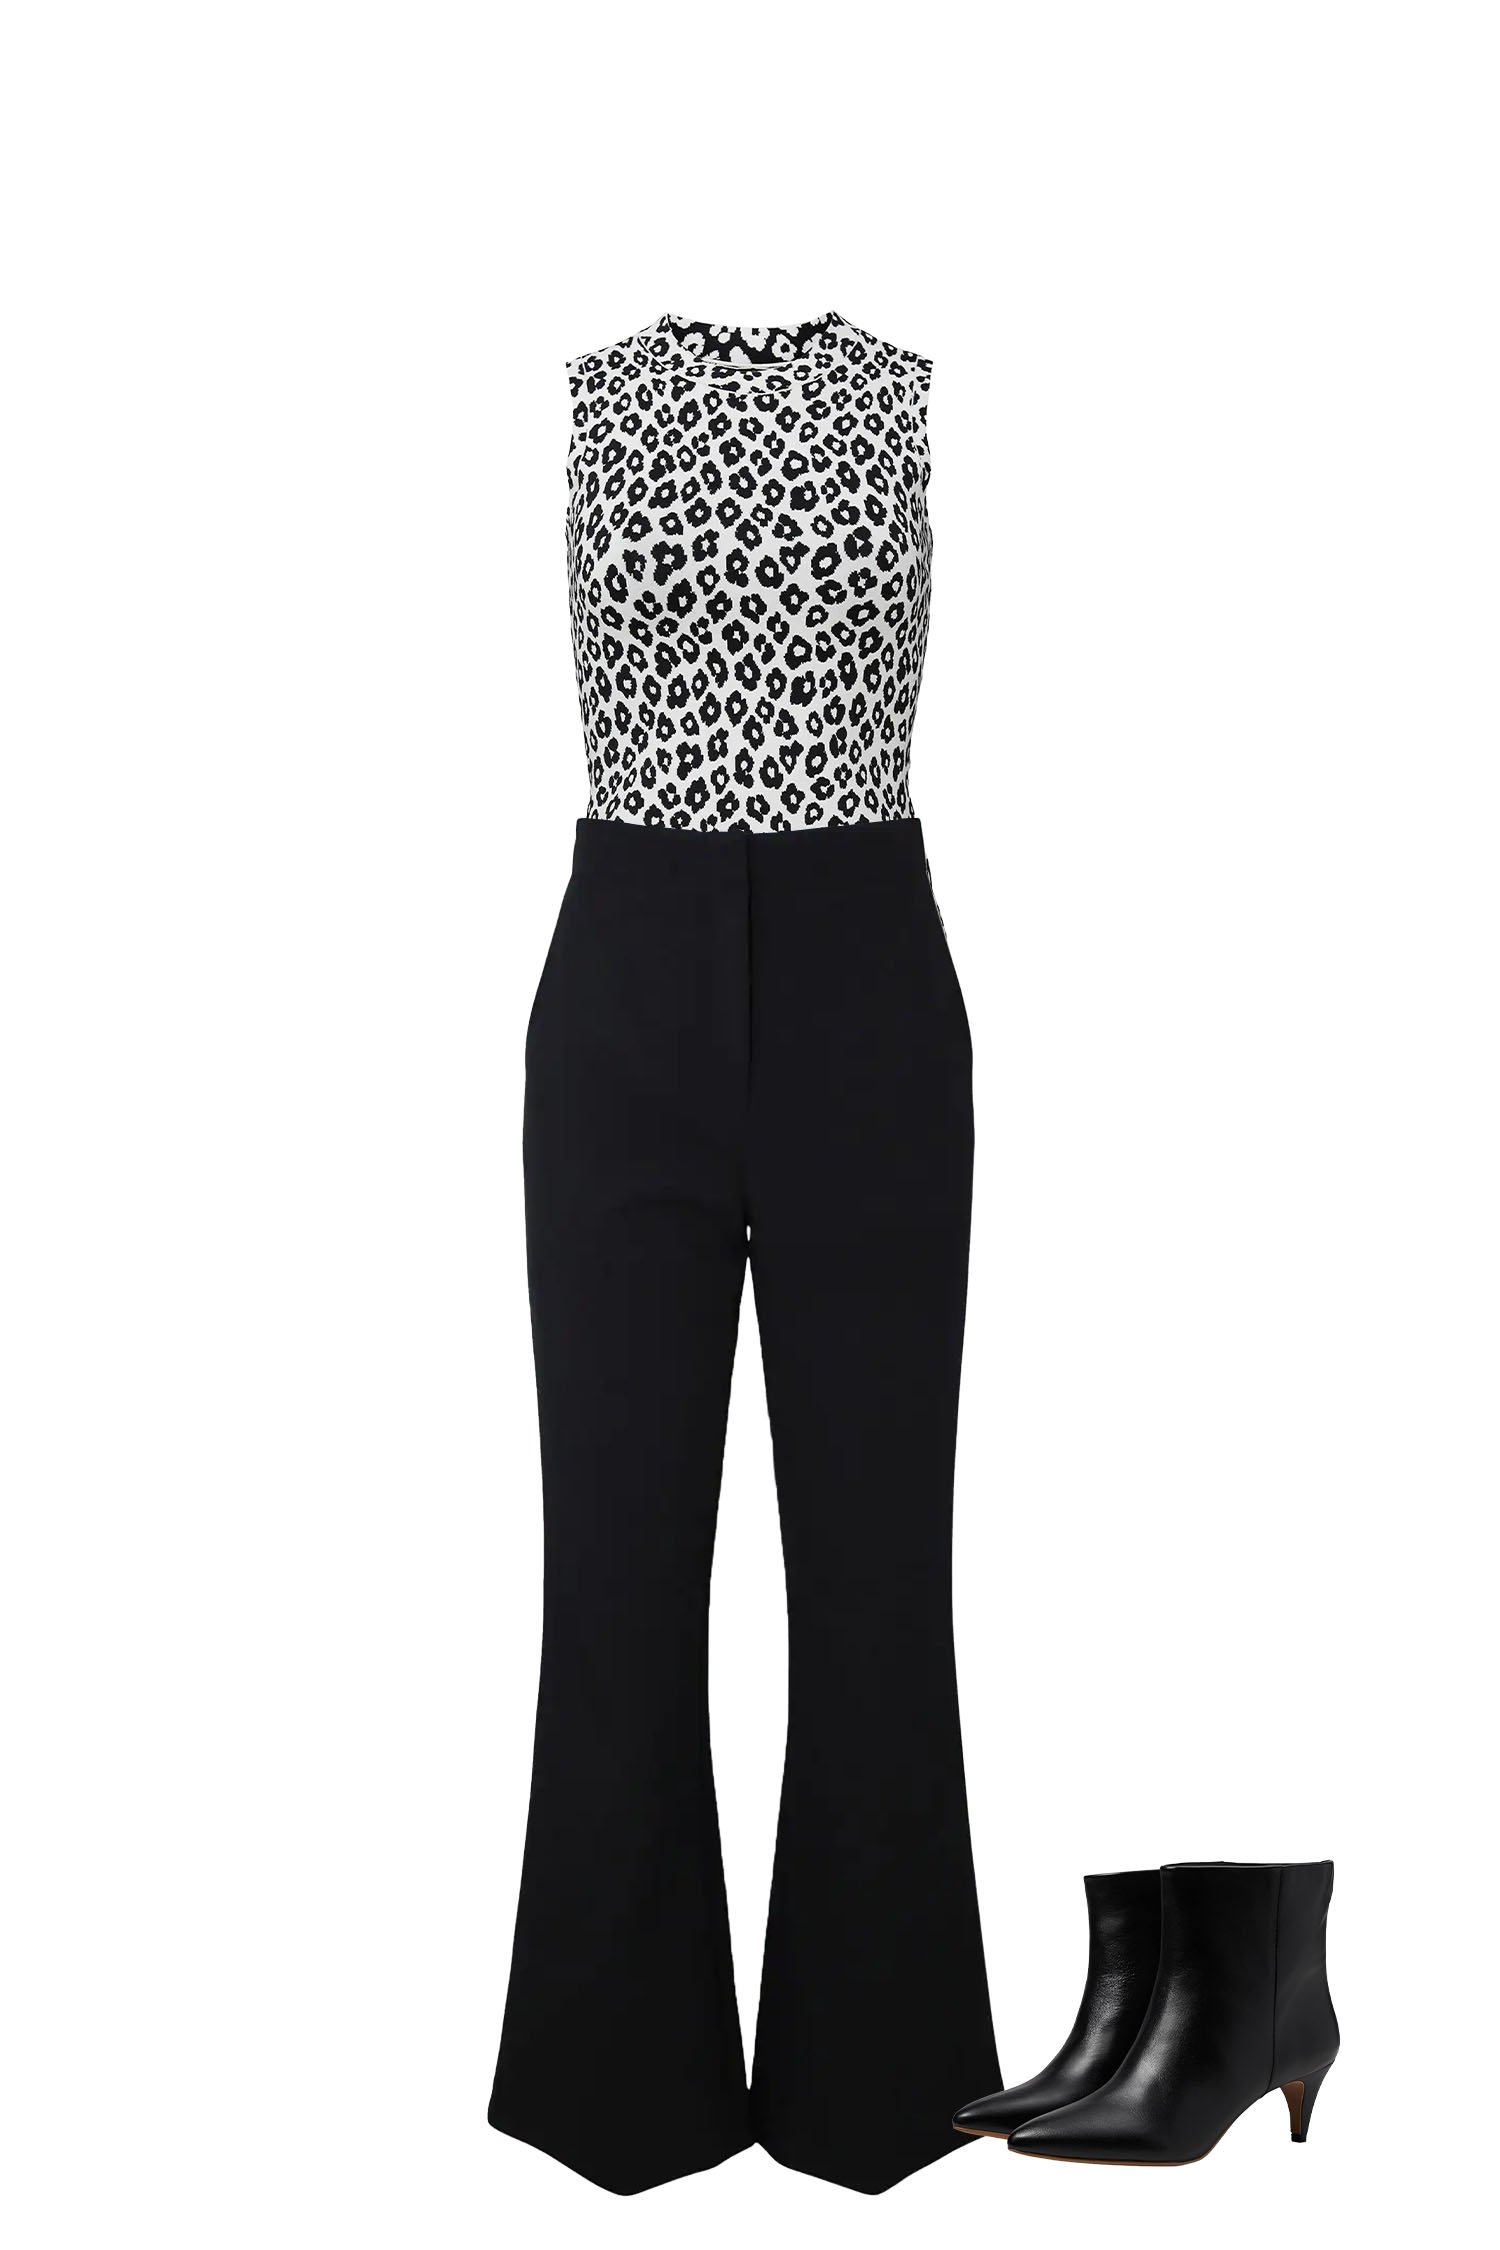 10 Chic Black Flare Pants Outfits — The Sustainable Closet